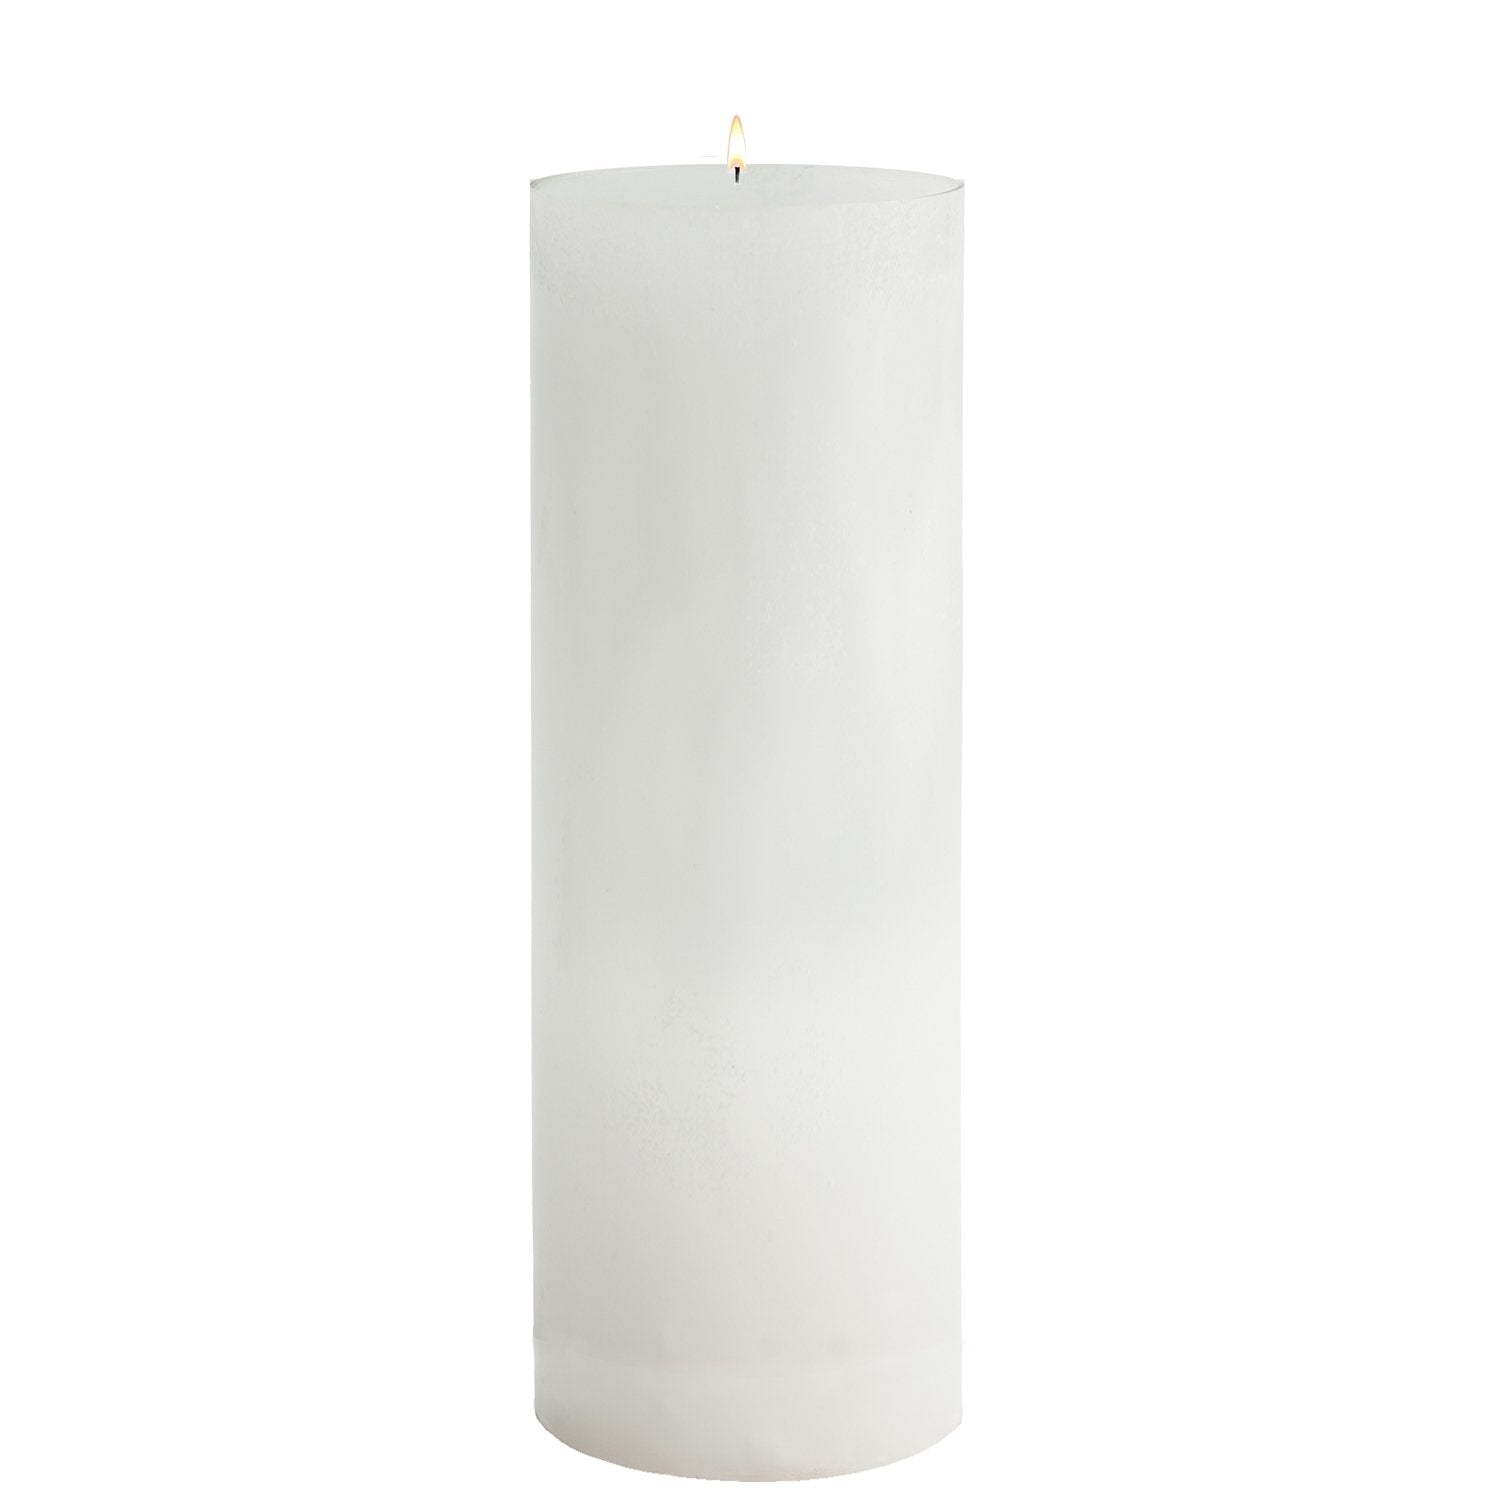 Stone Candles Unscented Pillar White 4x12